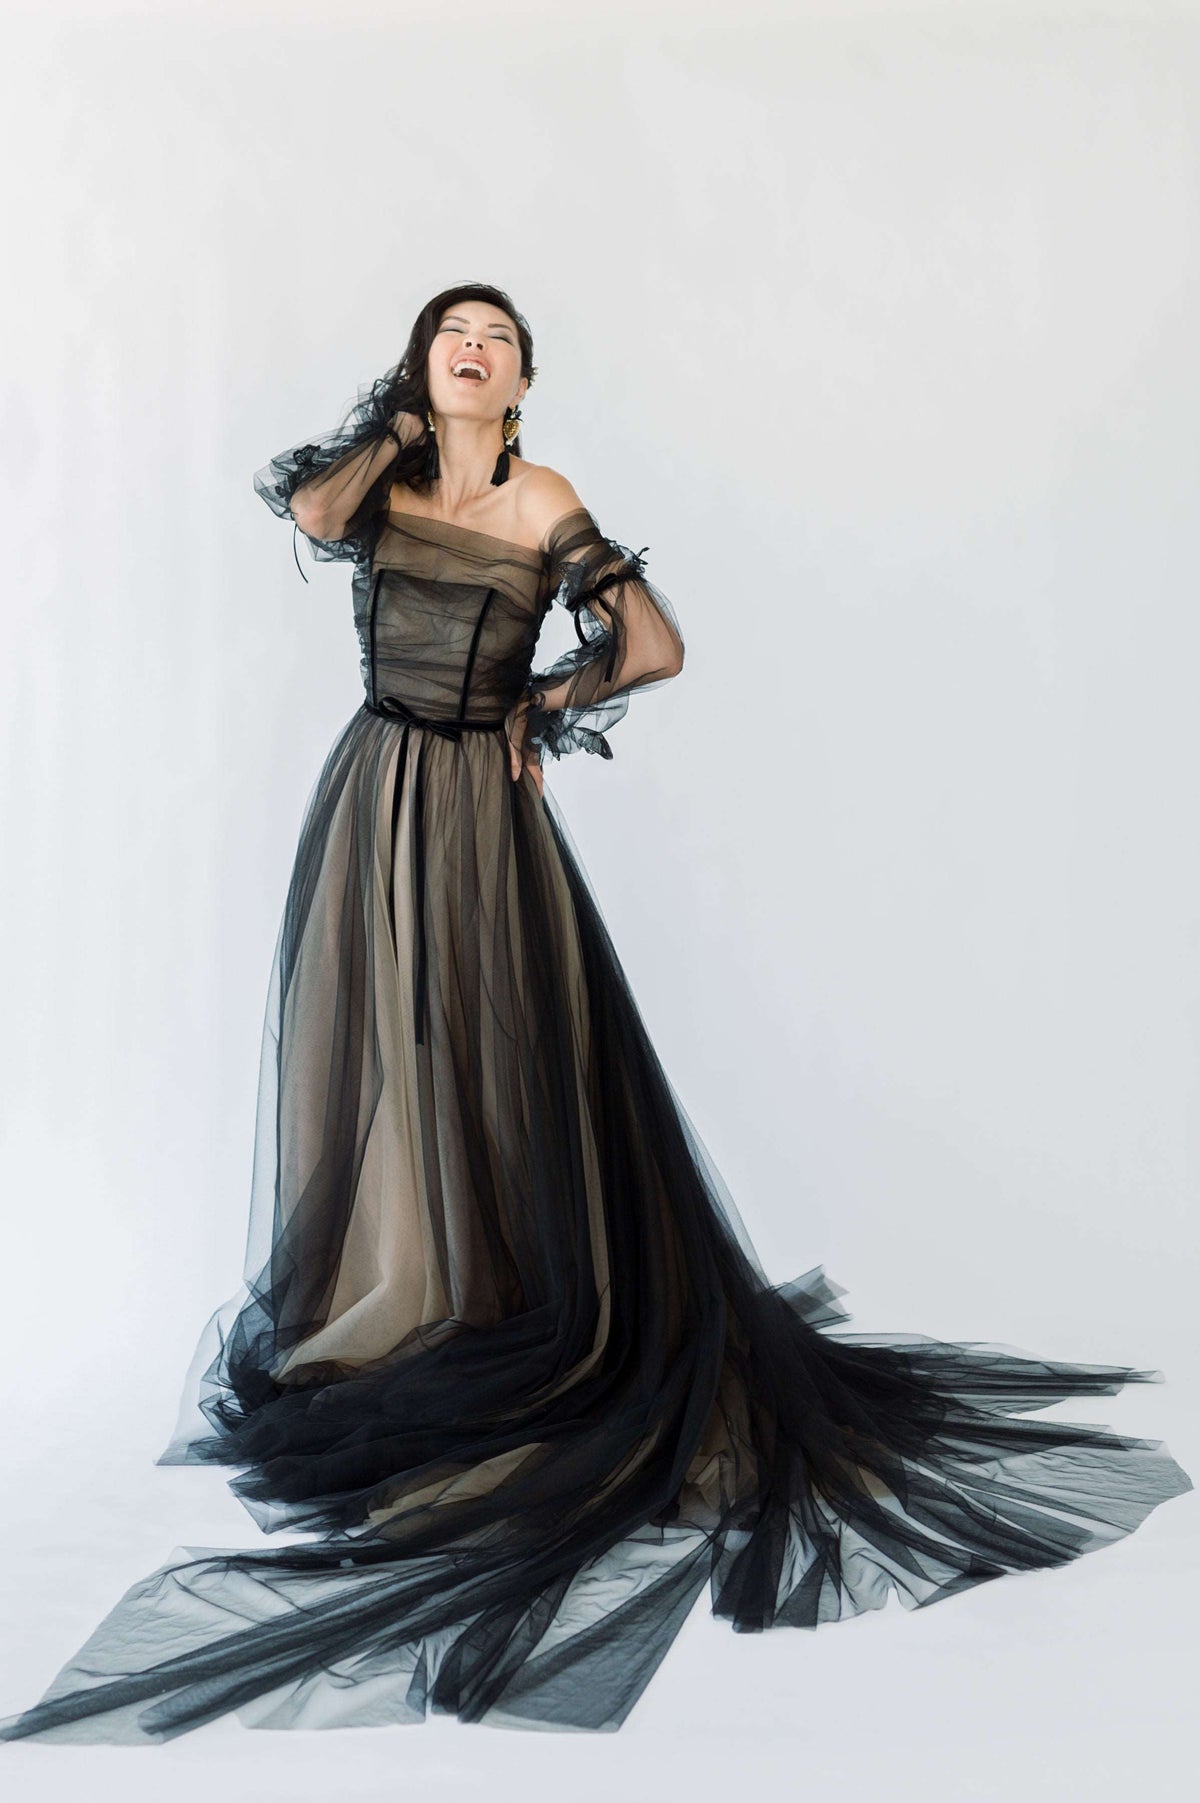 Orchid, black tulle alternative wedding gown. Goth core with a hint of whimsy. Unique wedding dress for unconventional brides. Catherine Langlois, Toronto,Canada.